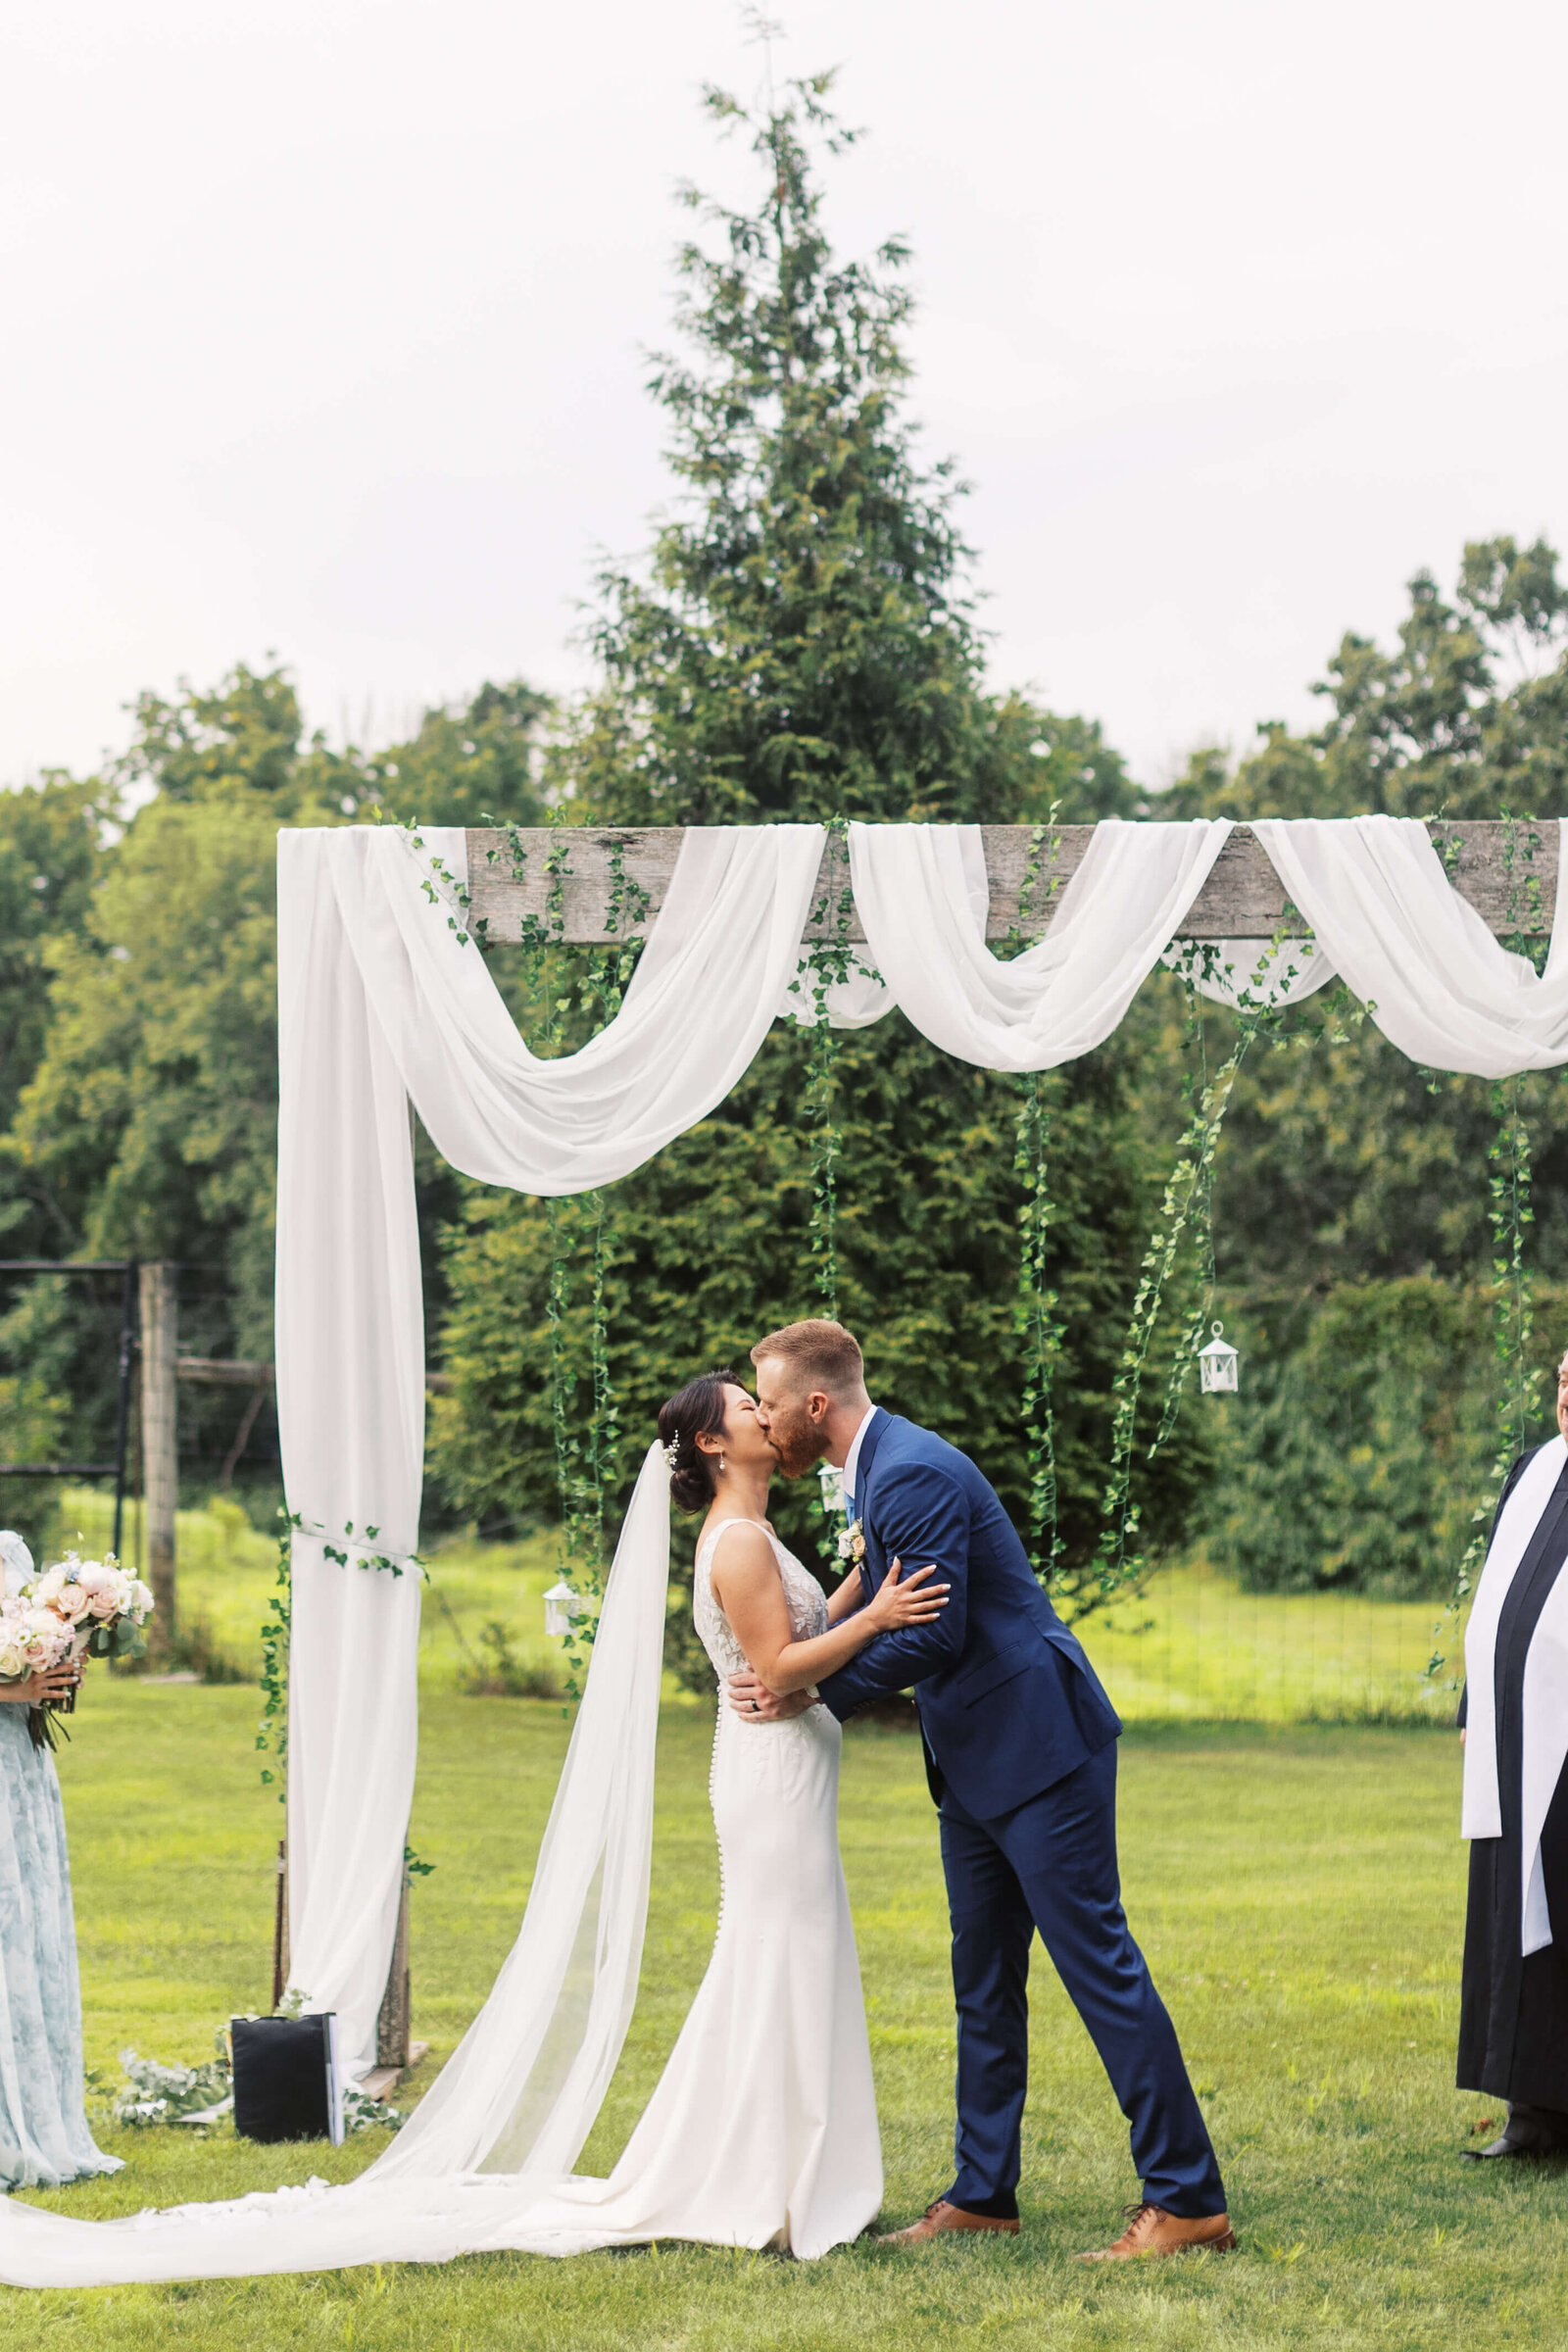 Bride and groom share their first kiss as husband and wife during outdoor wedding ceremony.